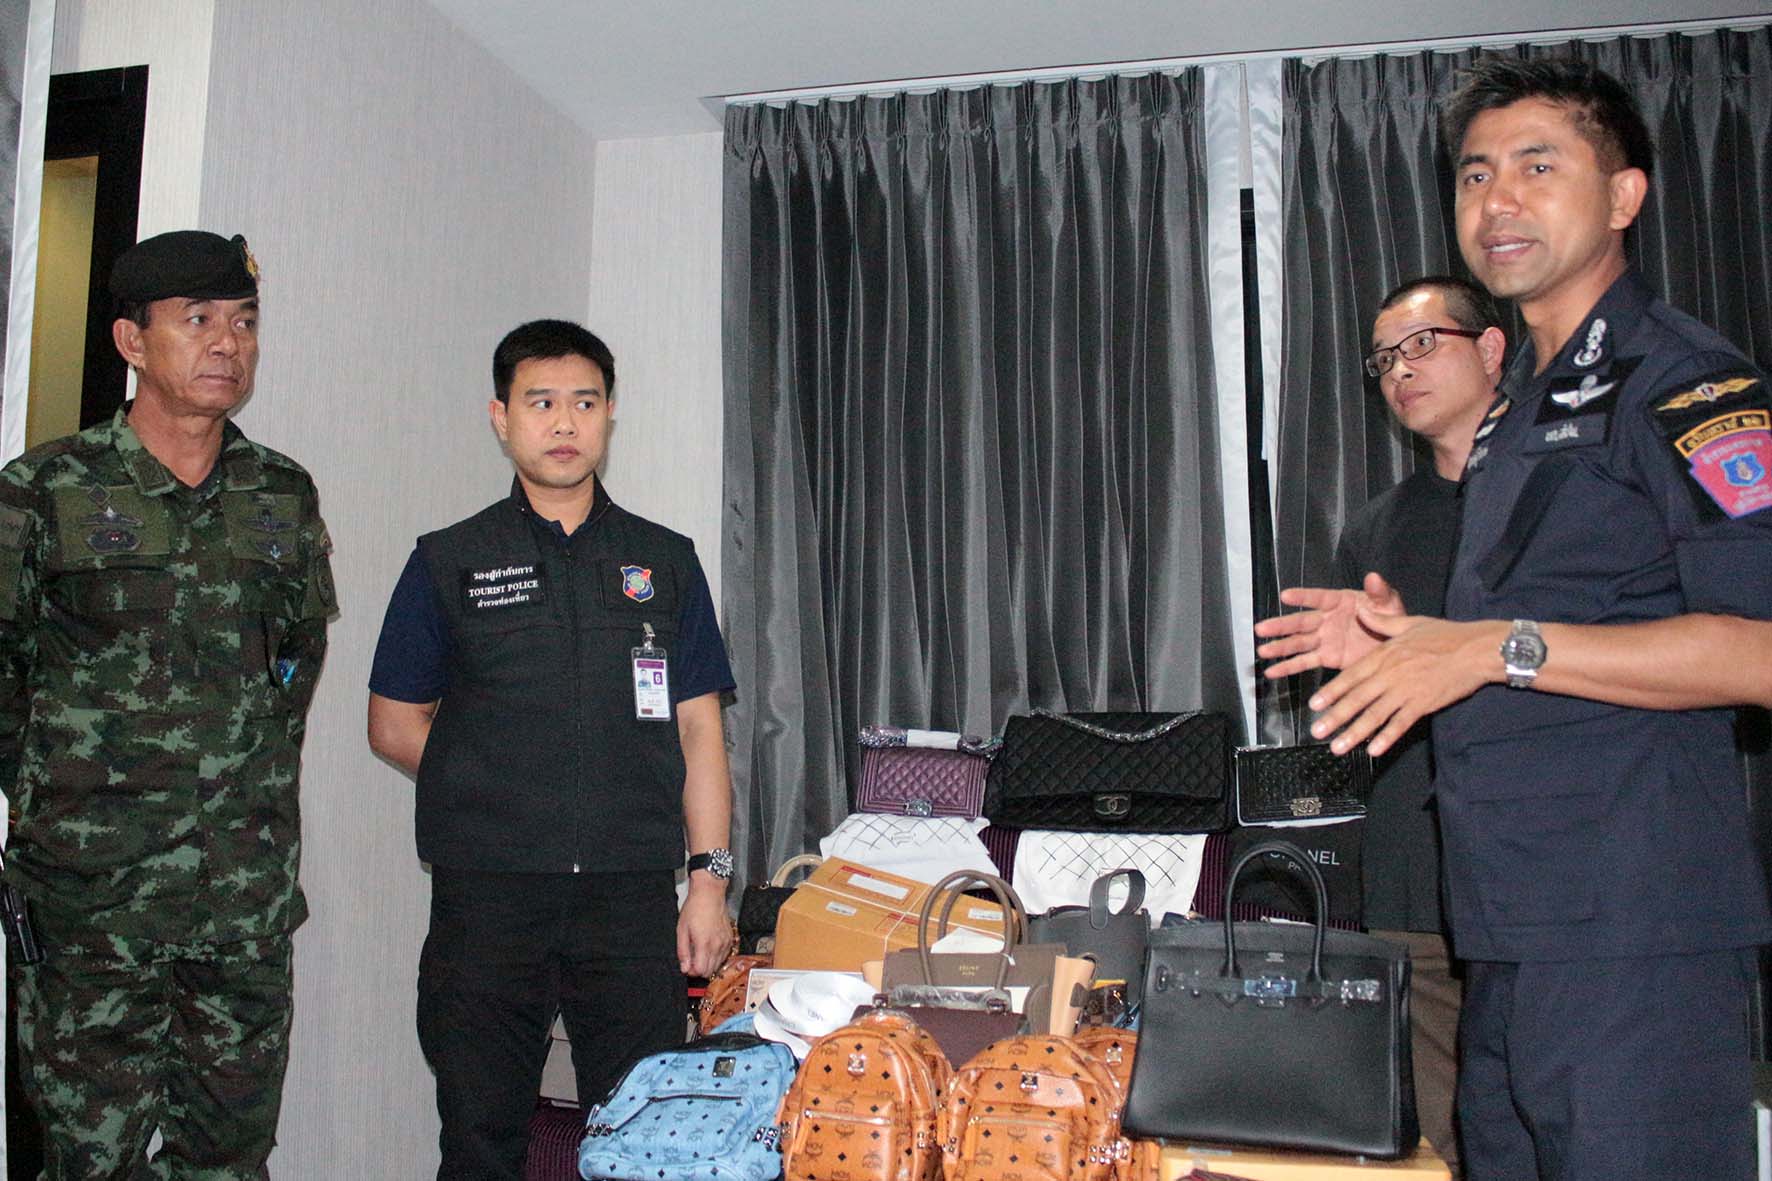 A Bangkok couple was arrested for allegedly storing 10 million baht in counterfeit goods destined for sale in a Pattaya condominium.